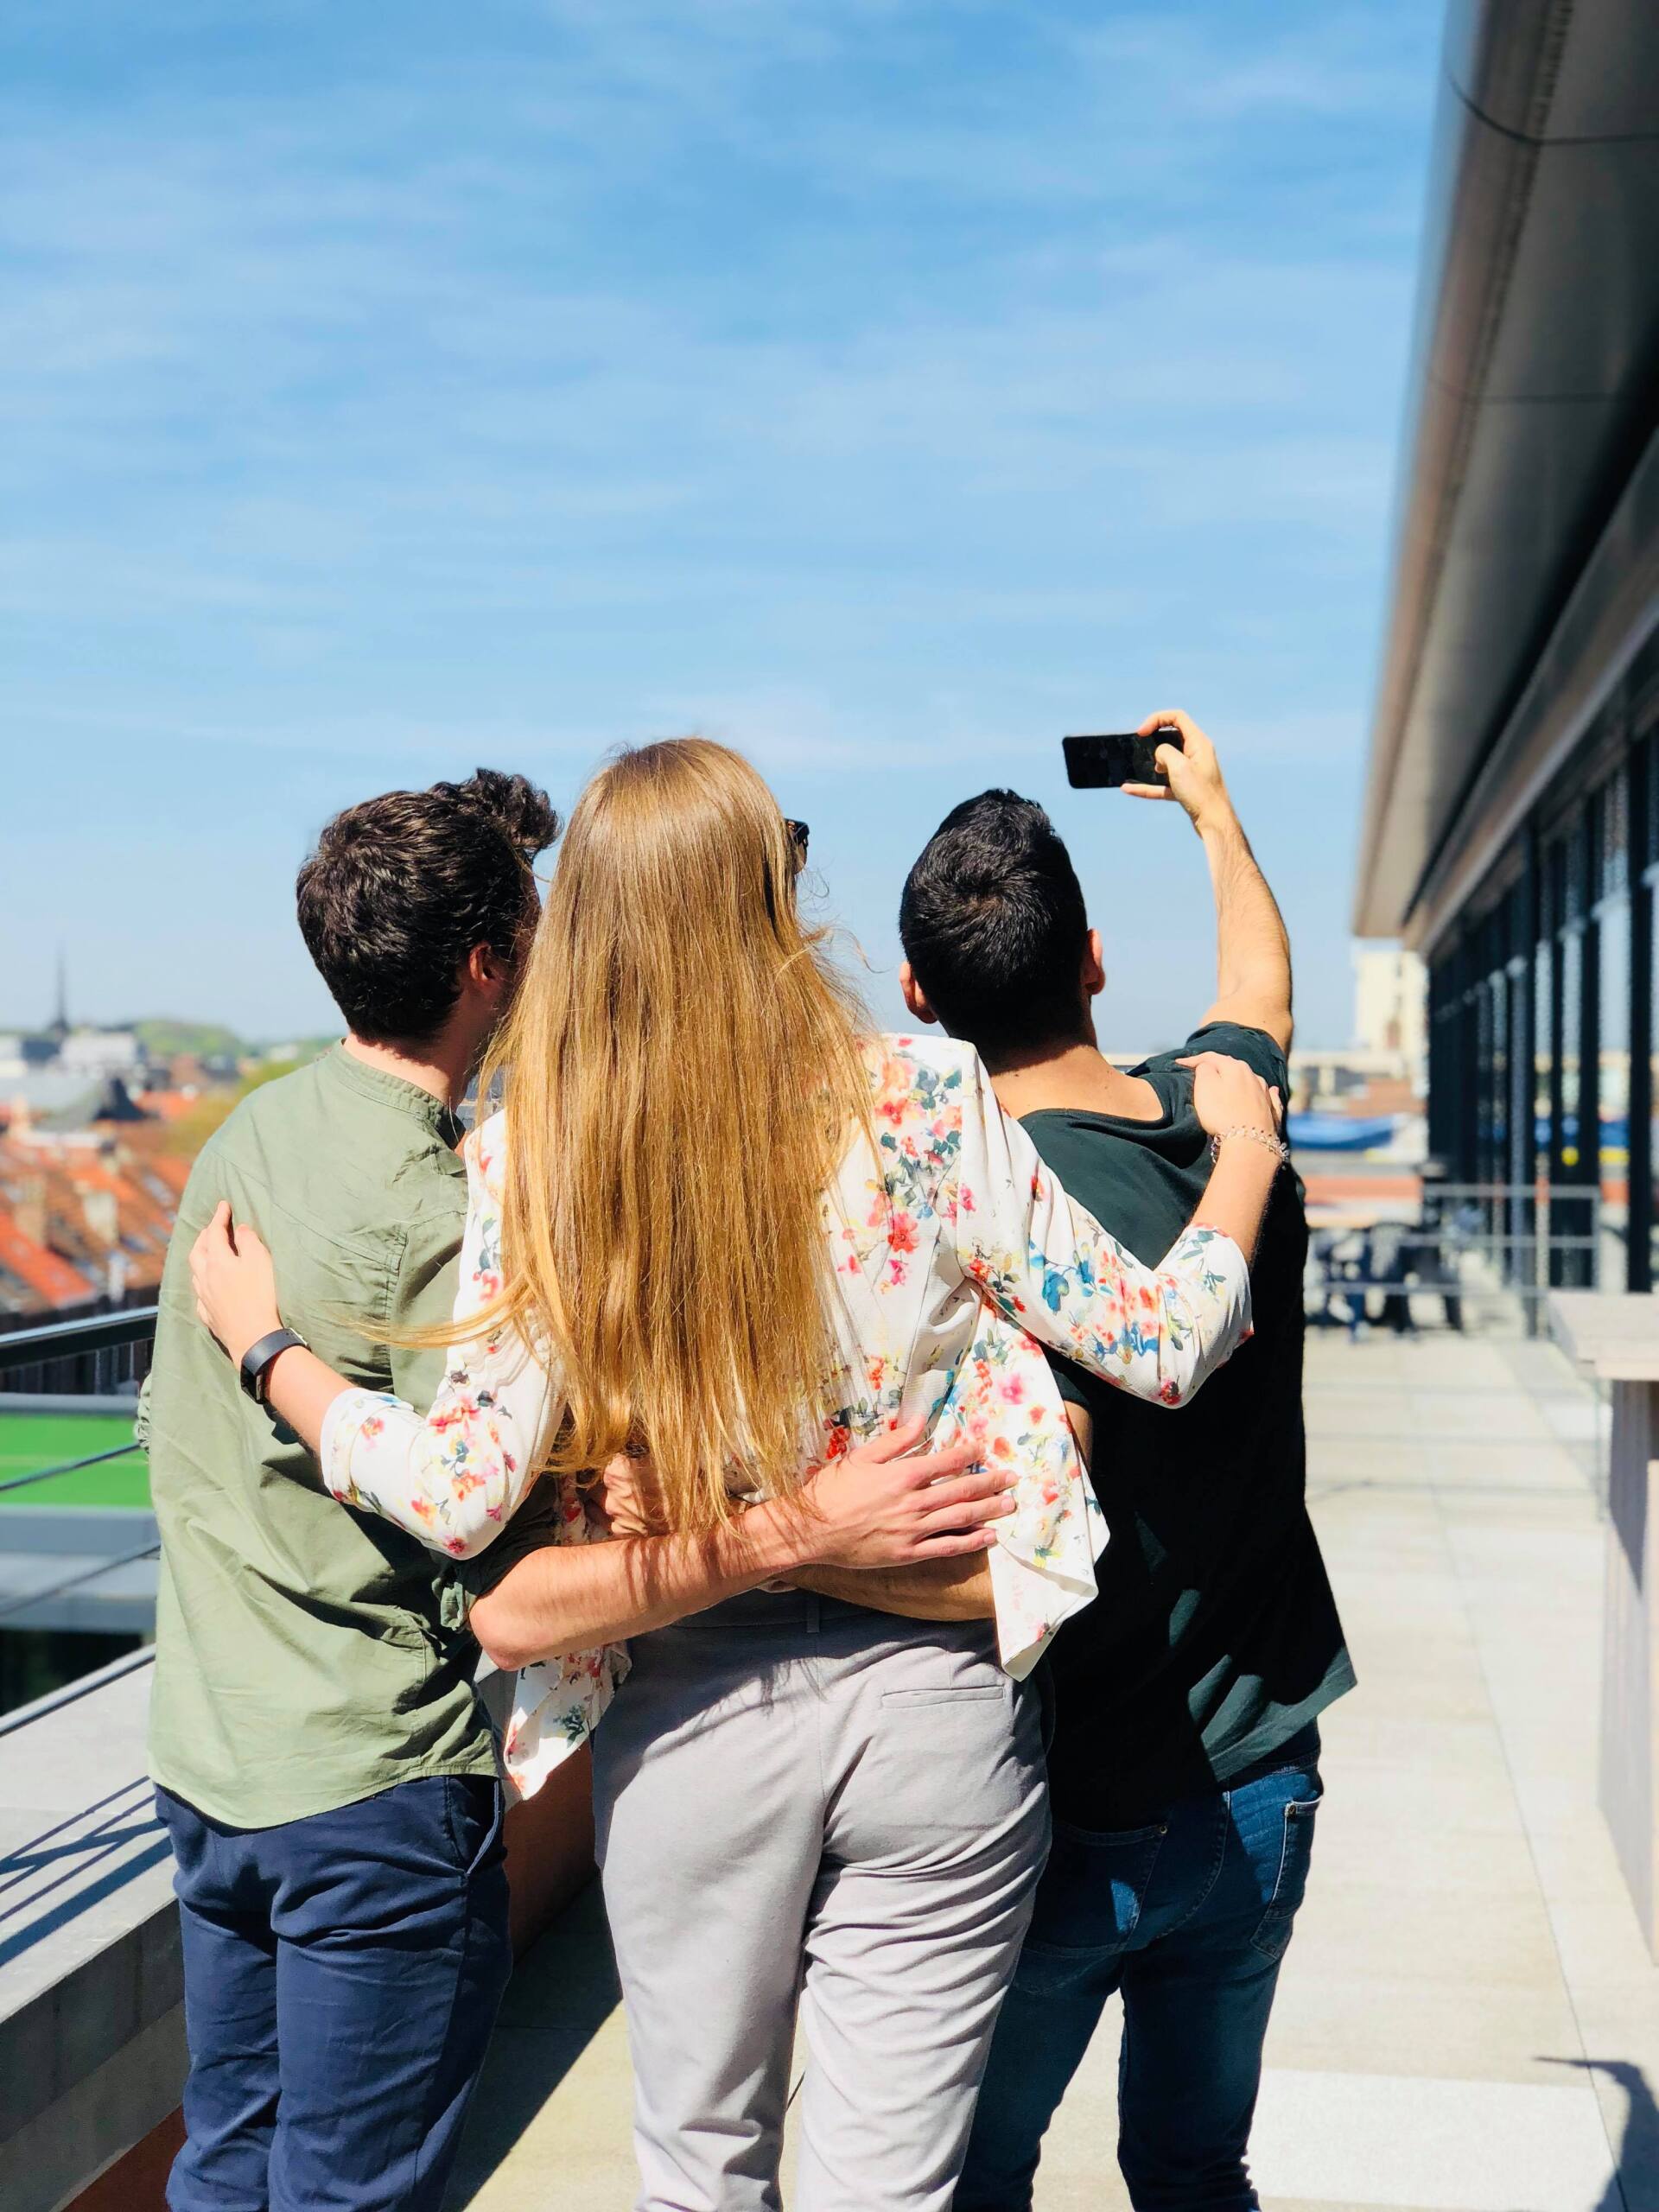 A man is taking a picture of his friends on a rooftop